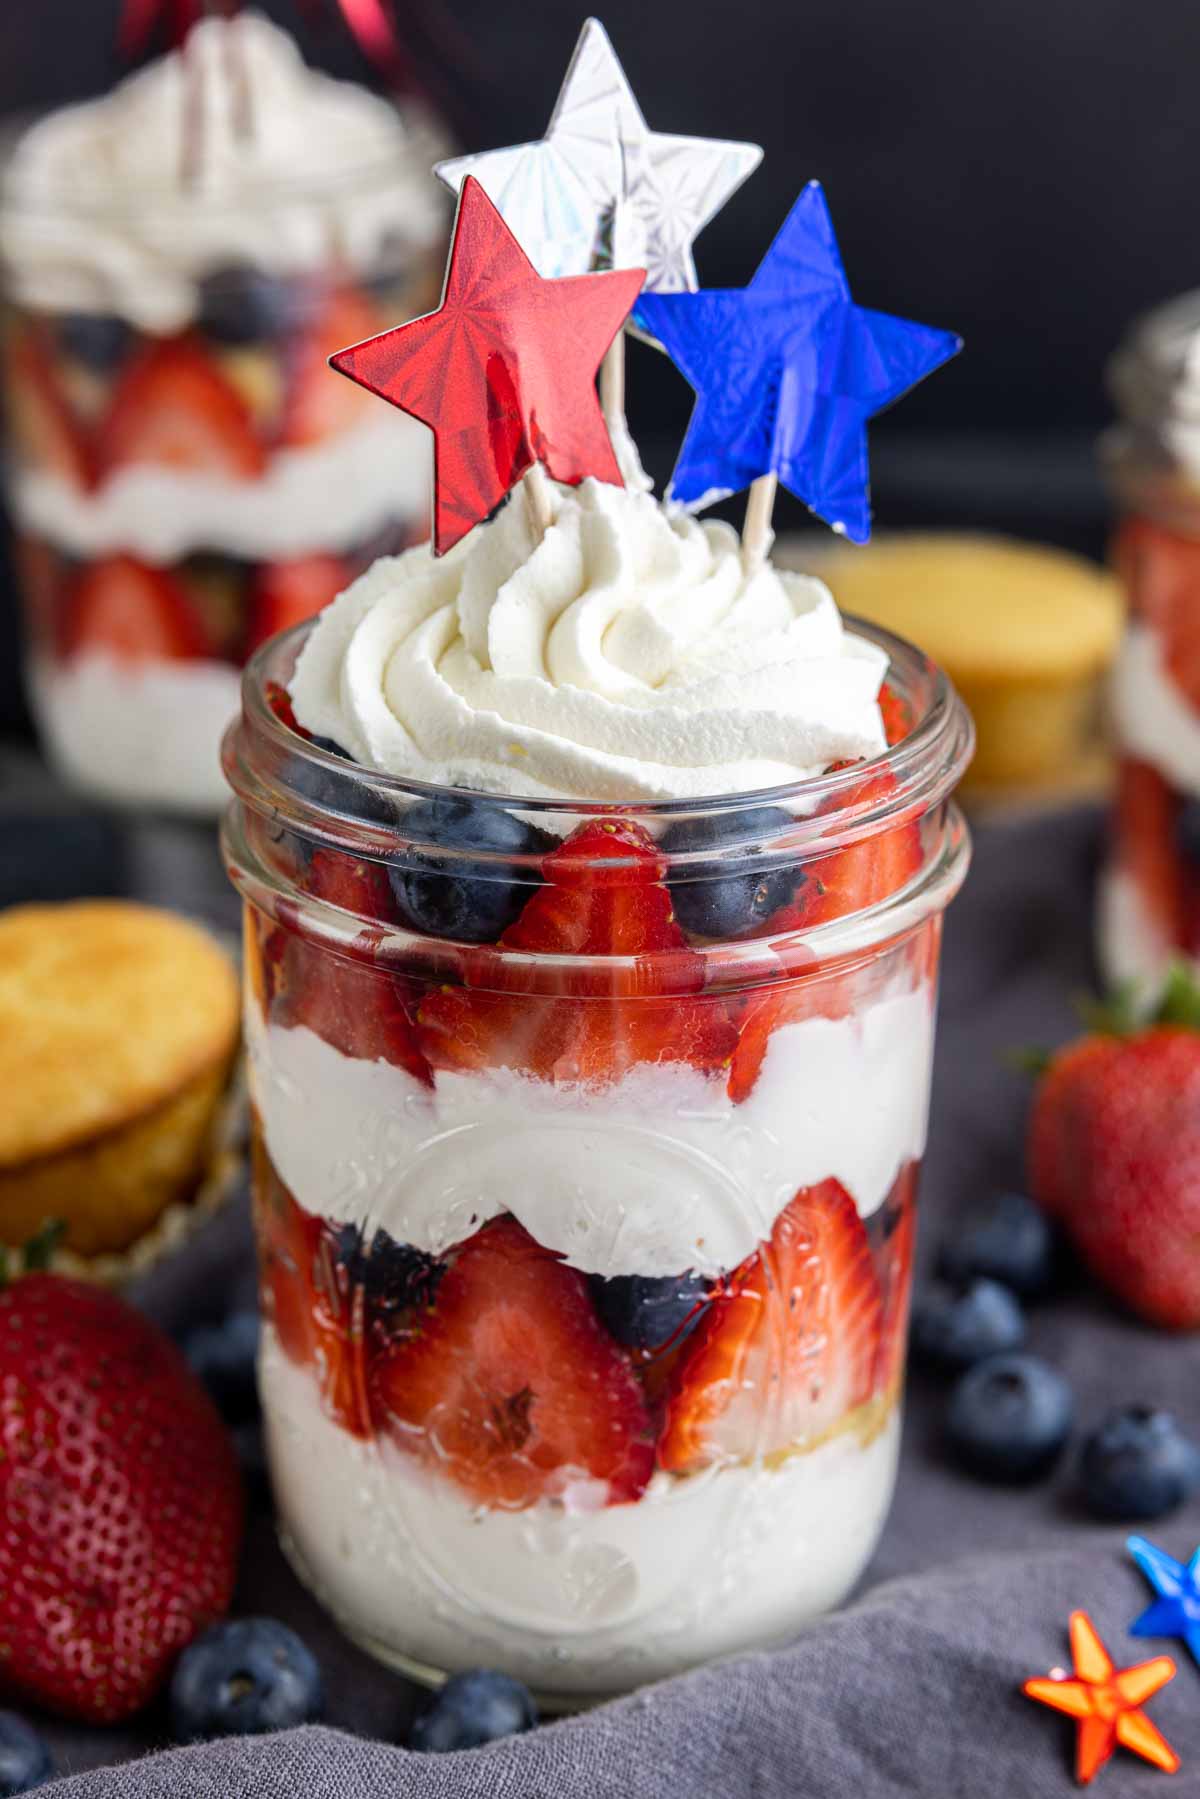 cupcakes in a jar with fresh fruit and whipped cream. Topped with 4th of July stars